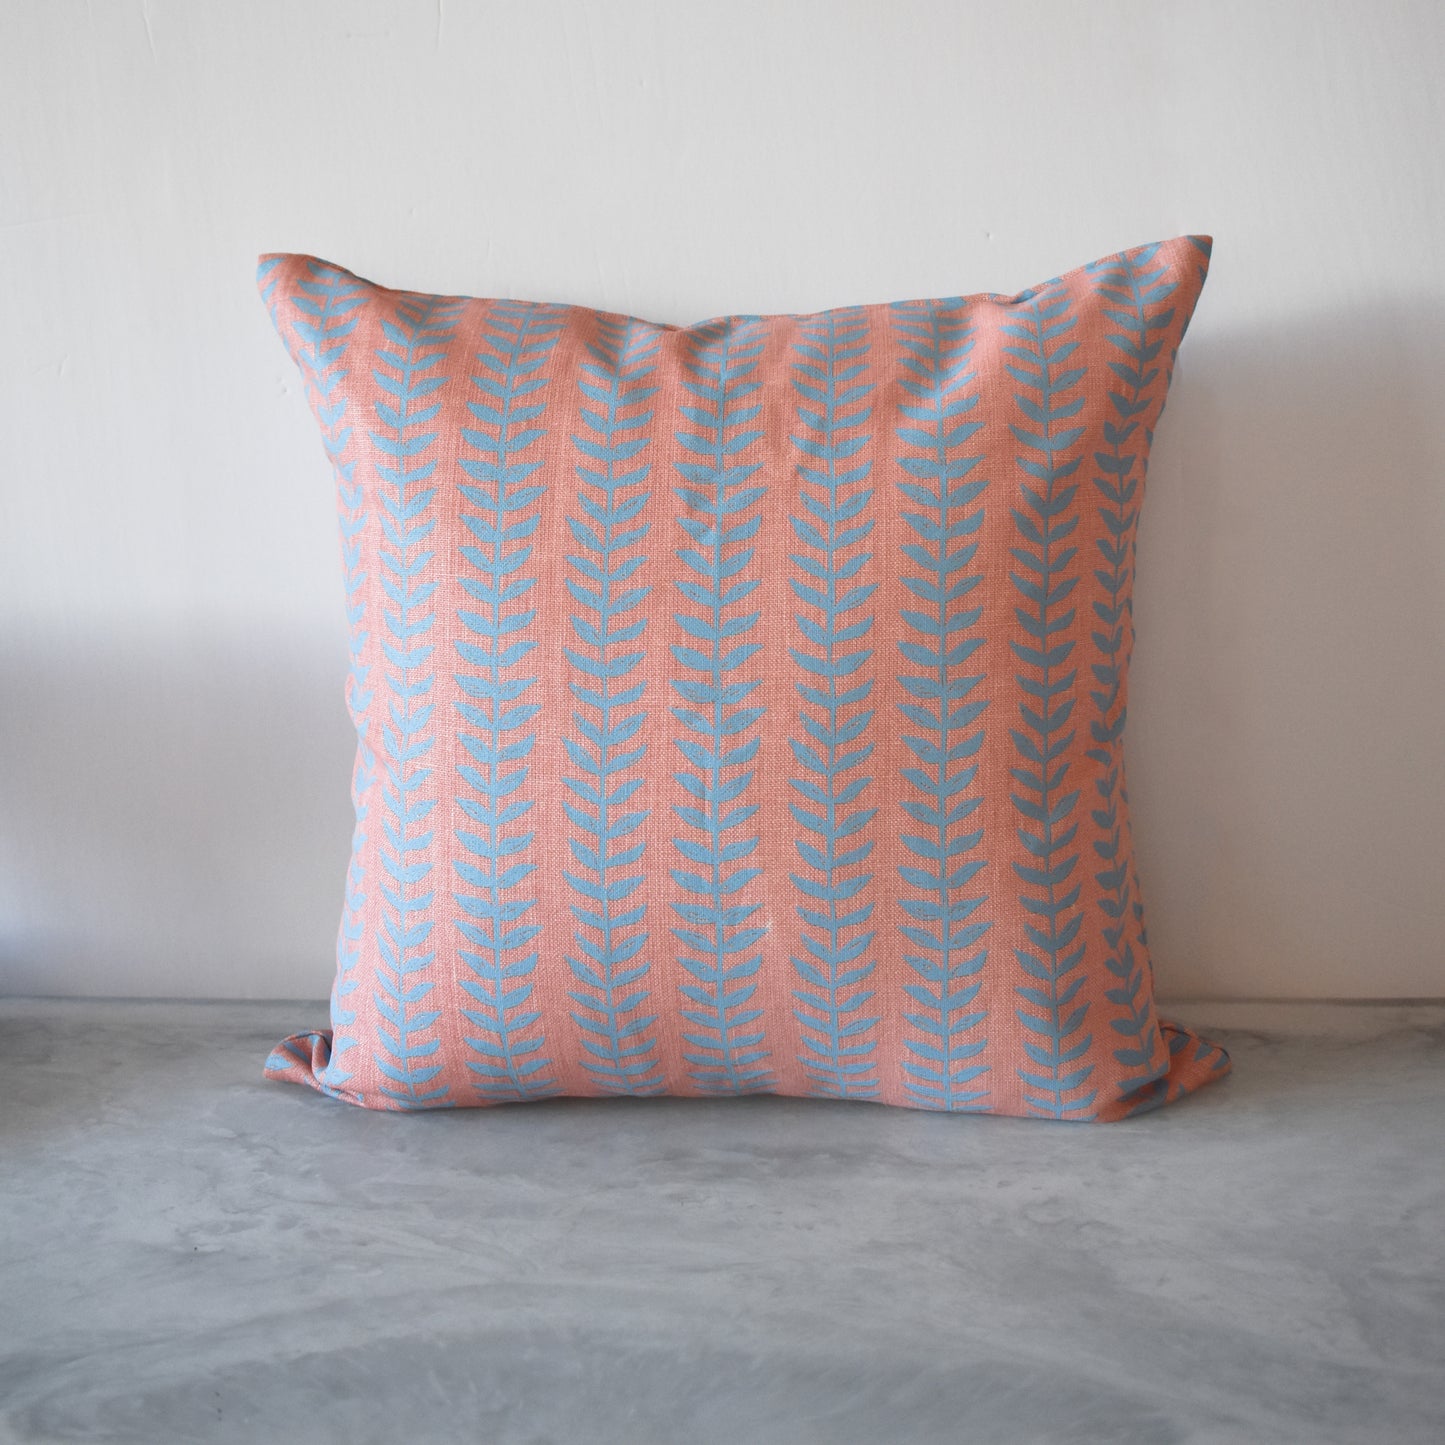 Willow Pillow in Blue & Pink - 22"